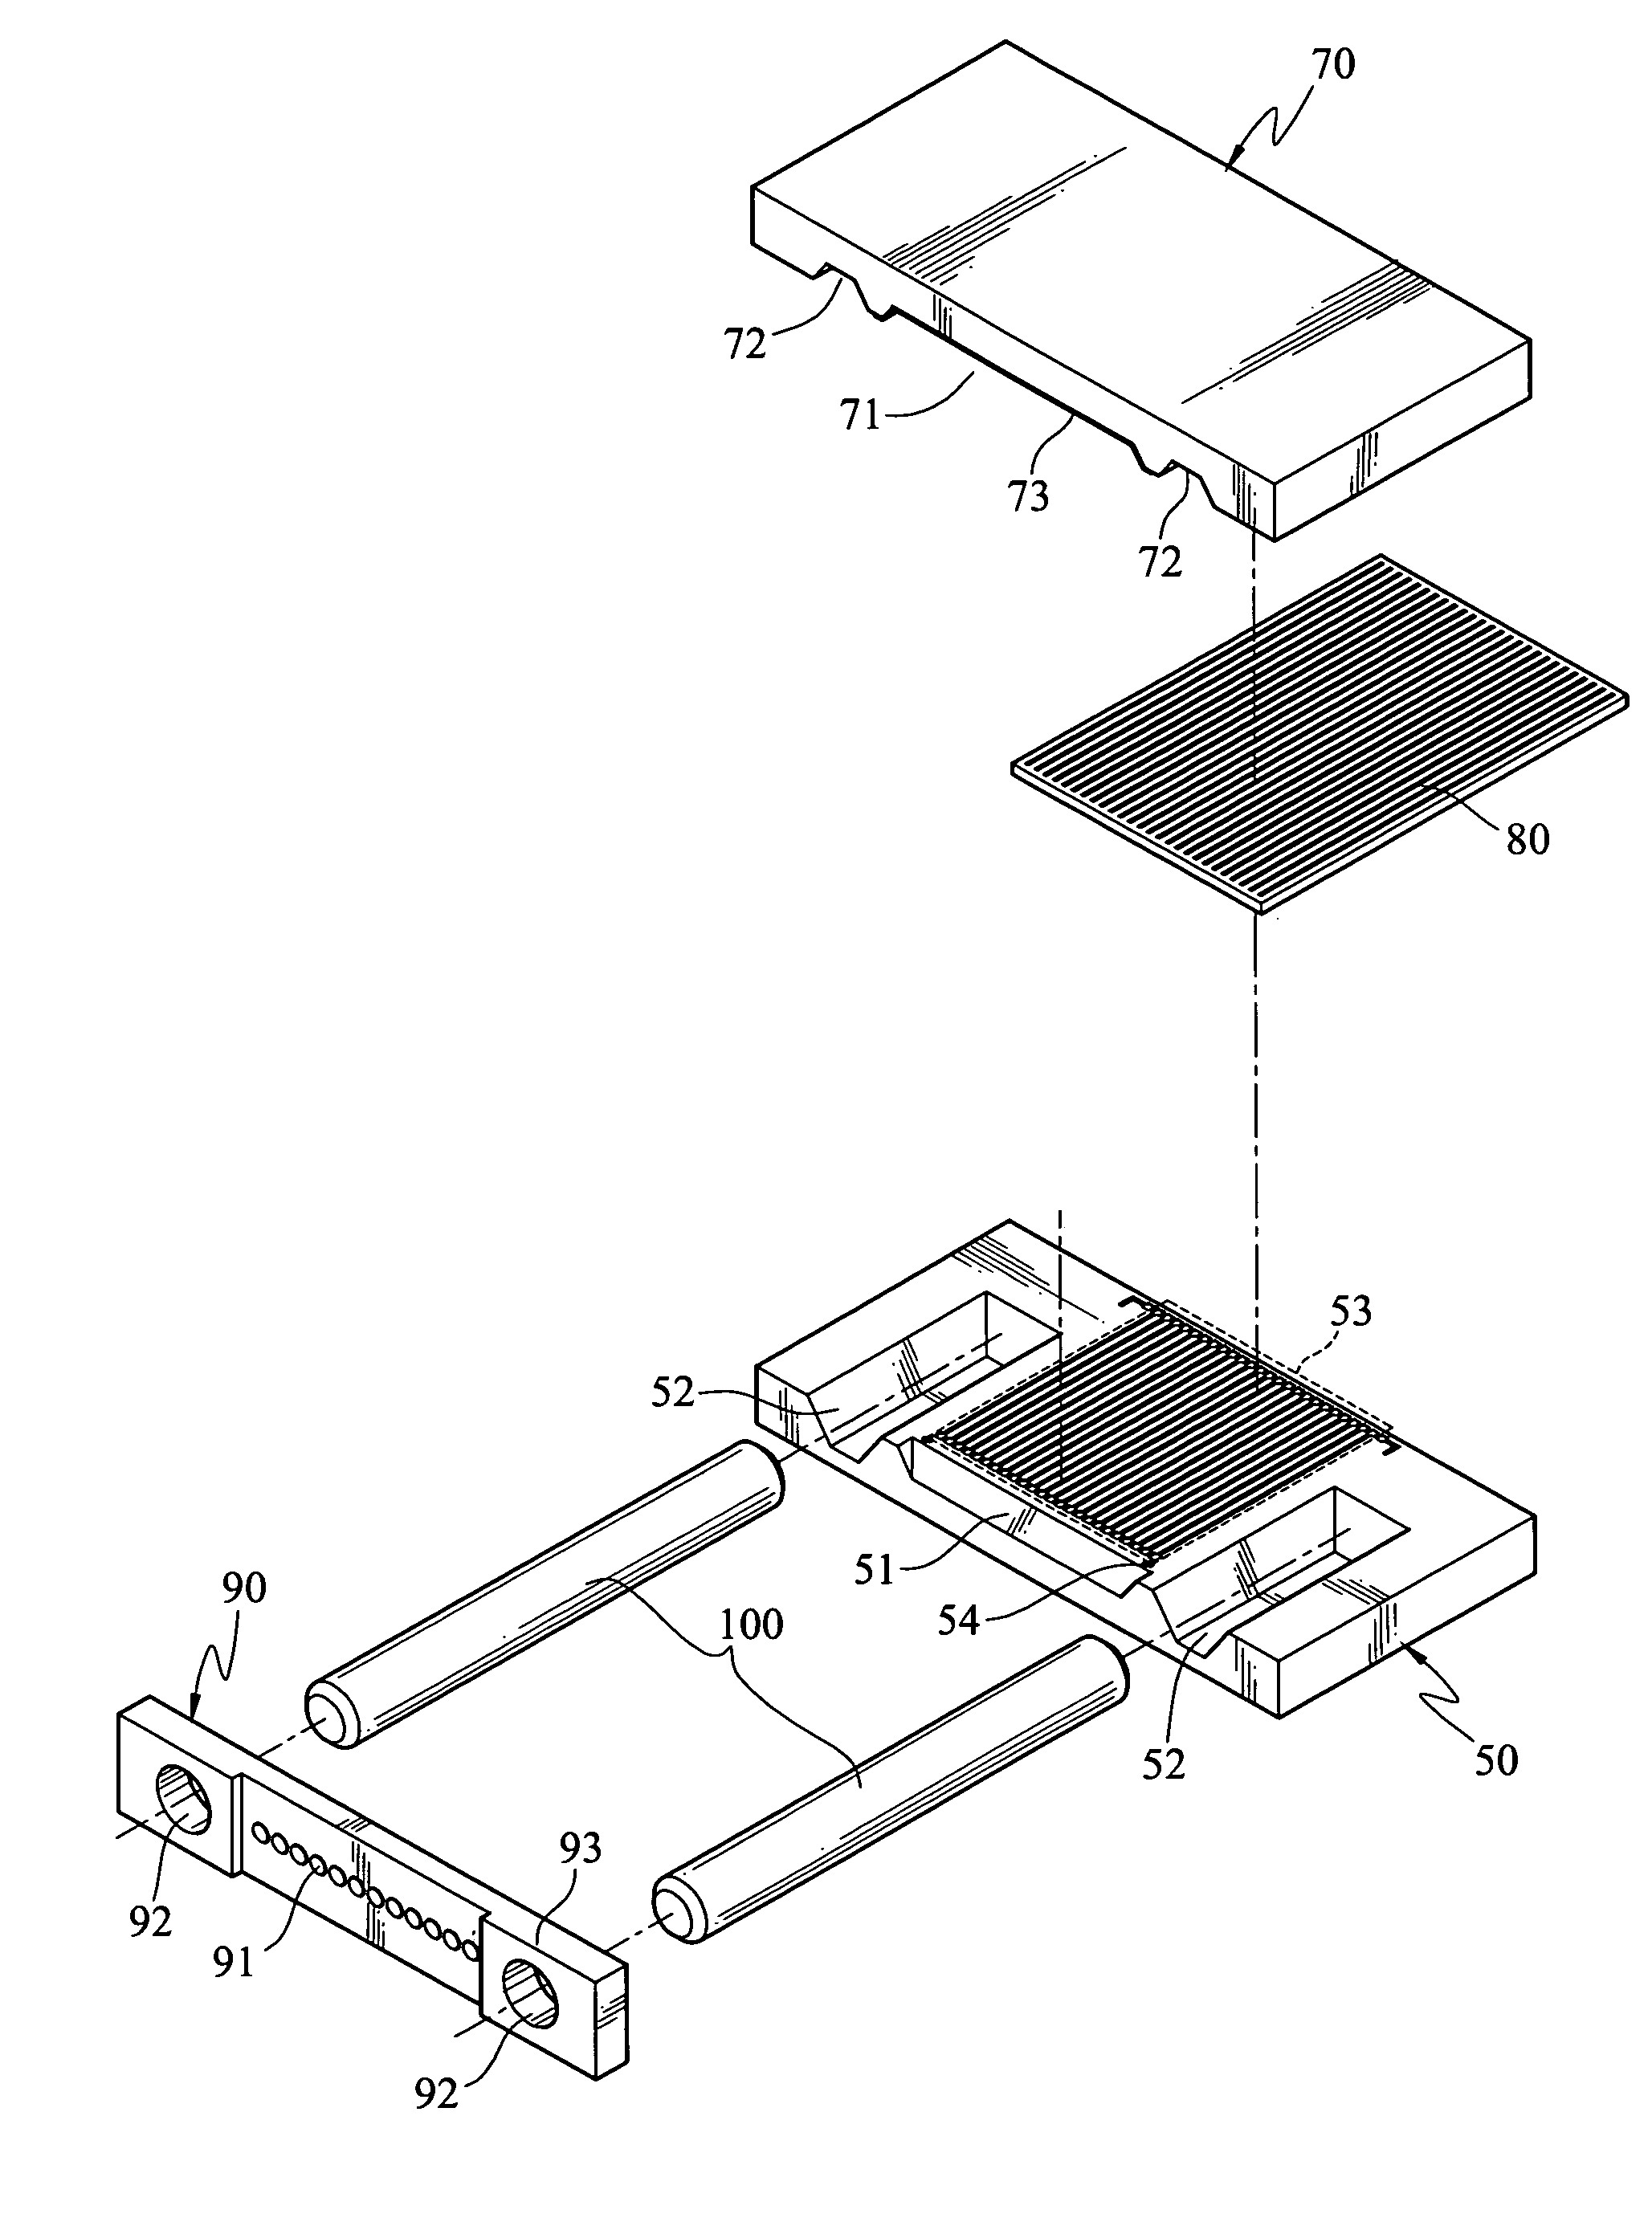 Parallel optical subassembly module structure